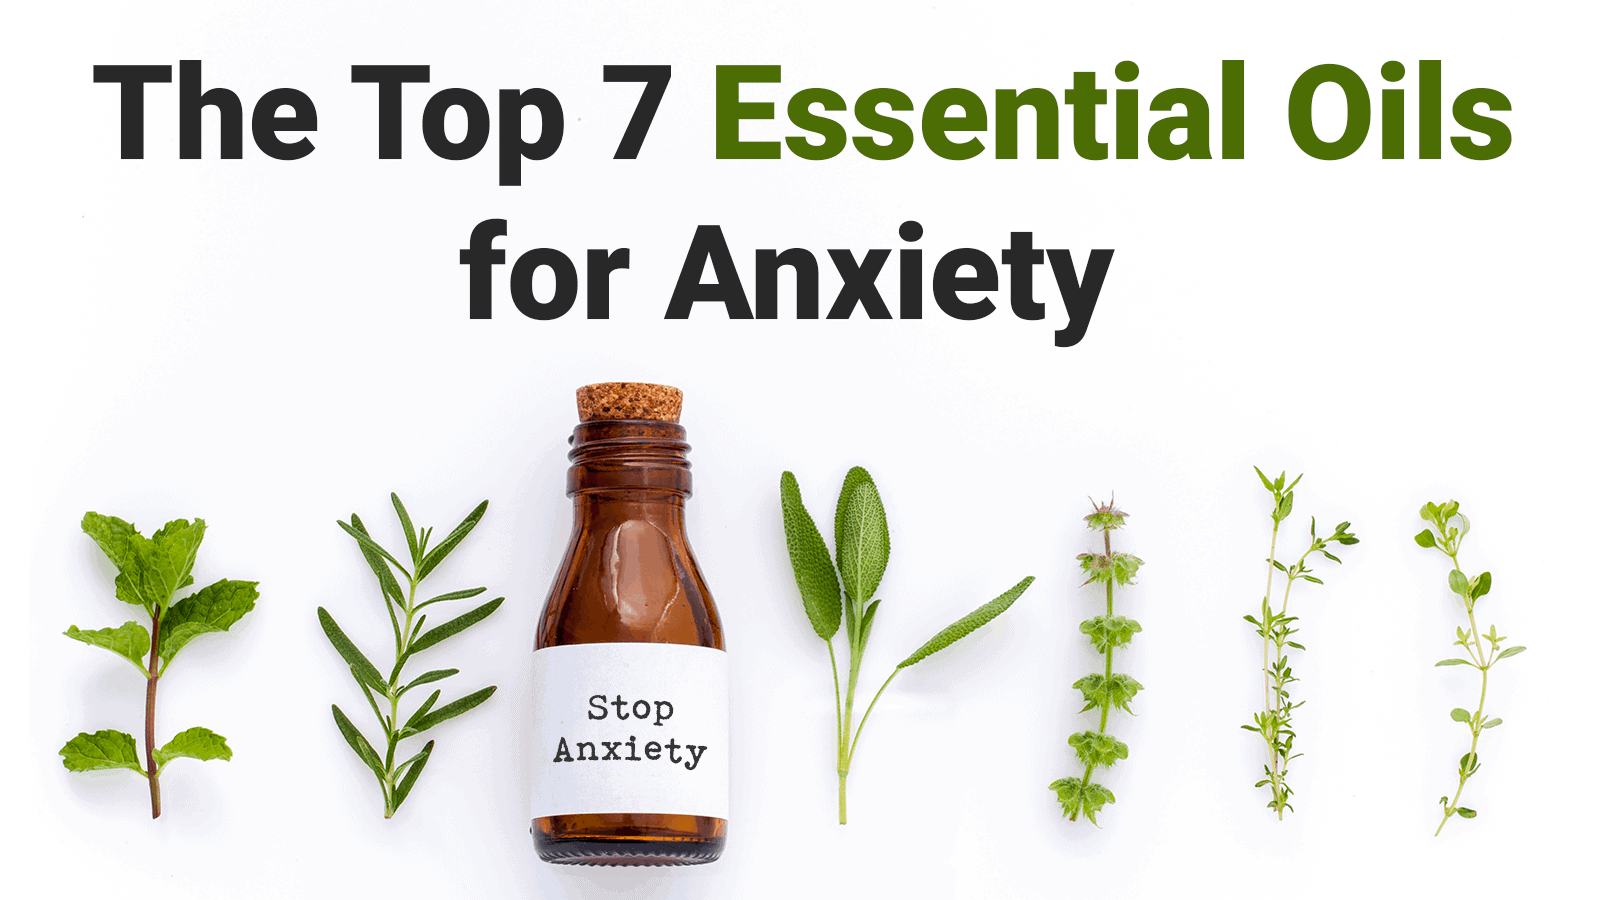 The Top 7 Essential Oils for Anxiety